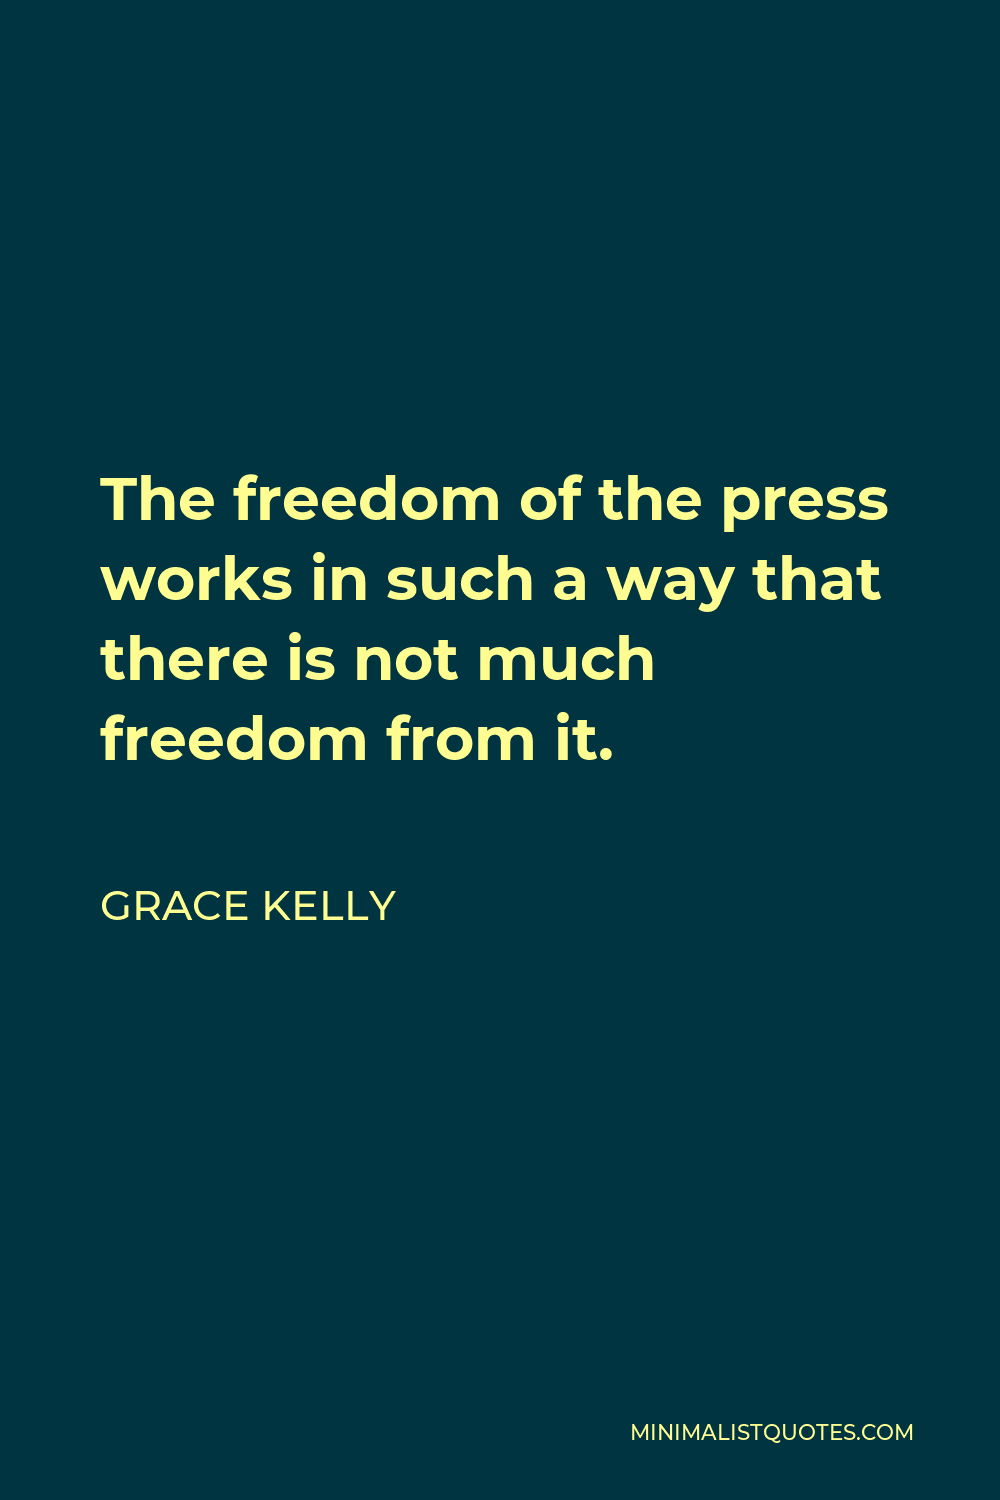 Grace Kelly Quote - The freedom of the press works in such a way that there is not much freedom from it.